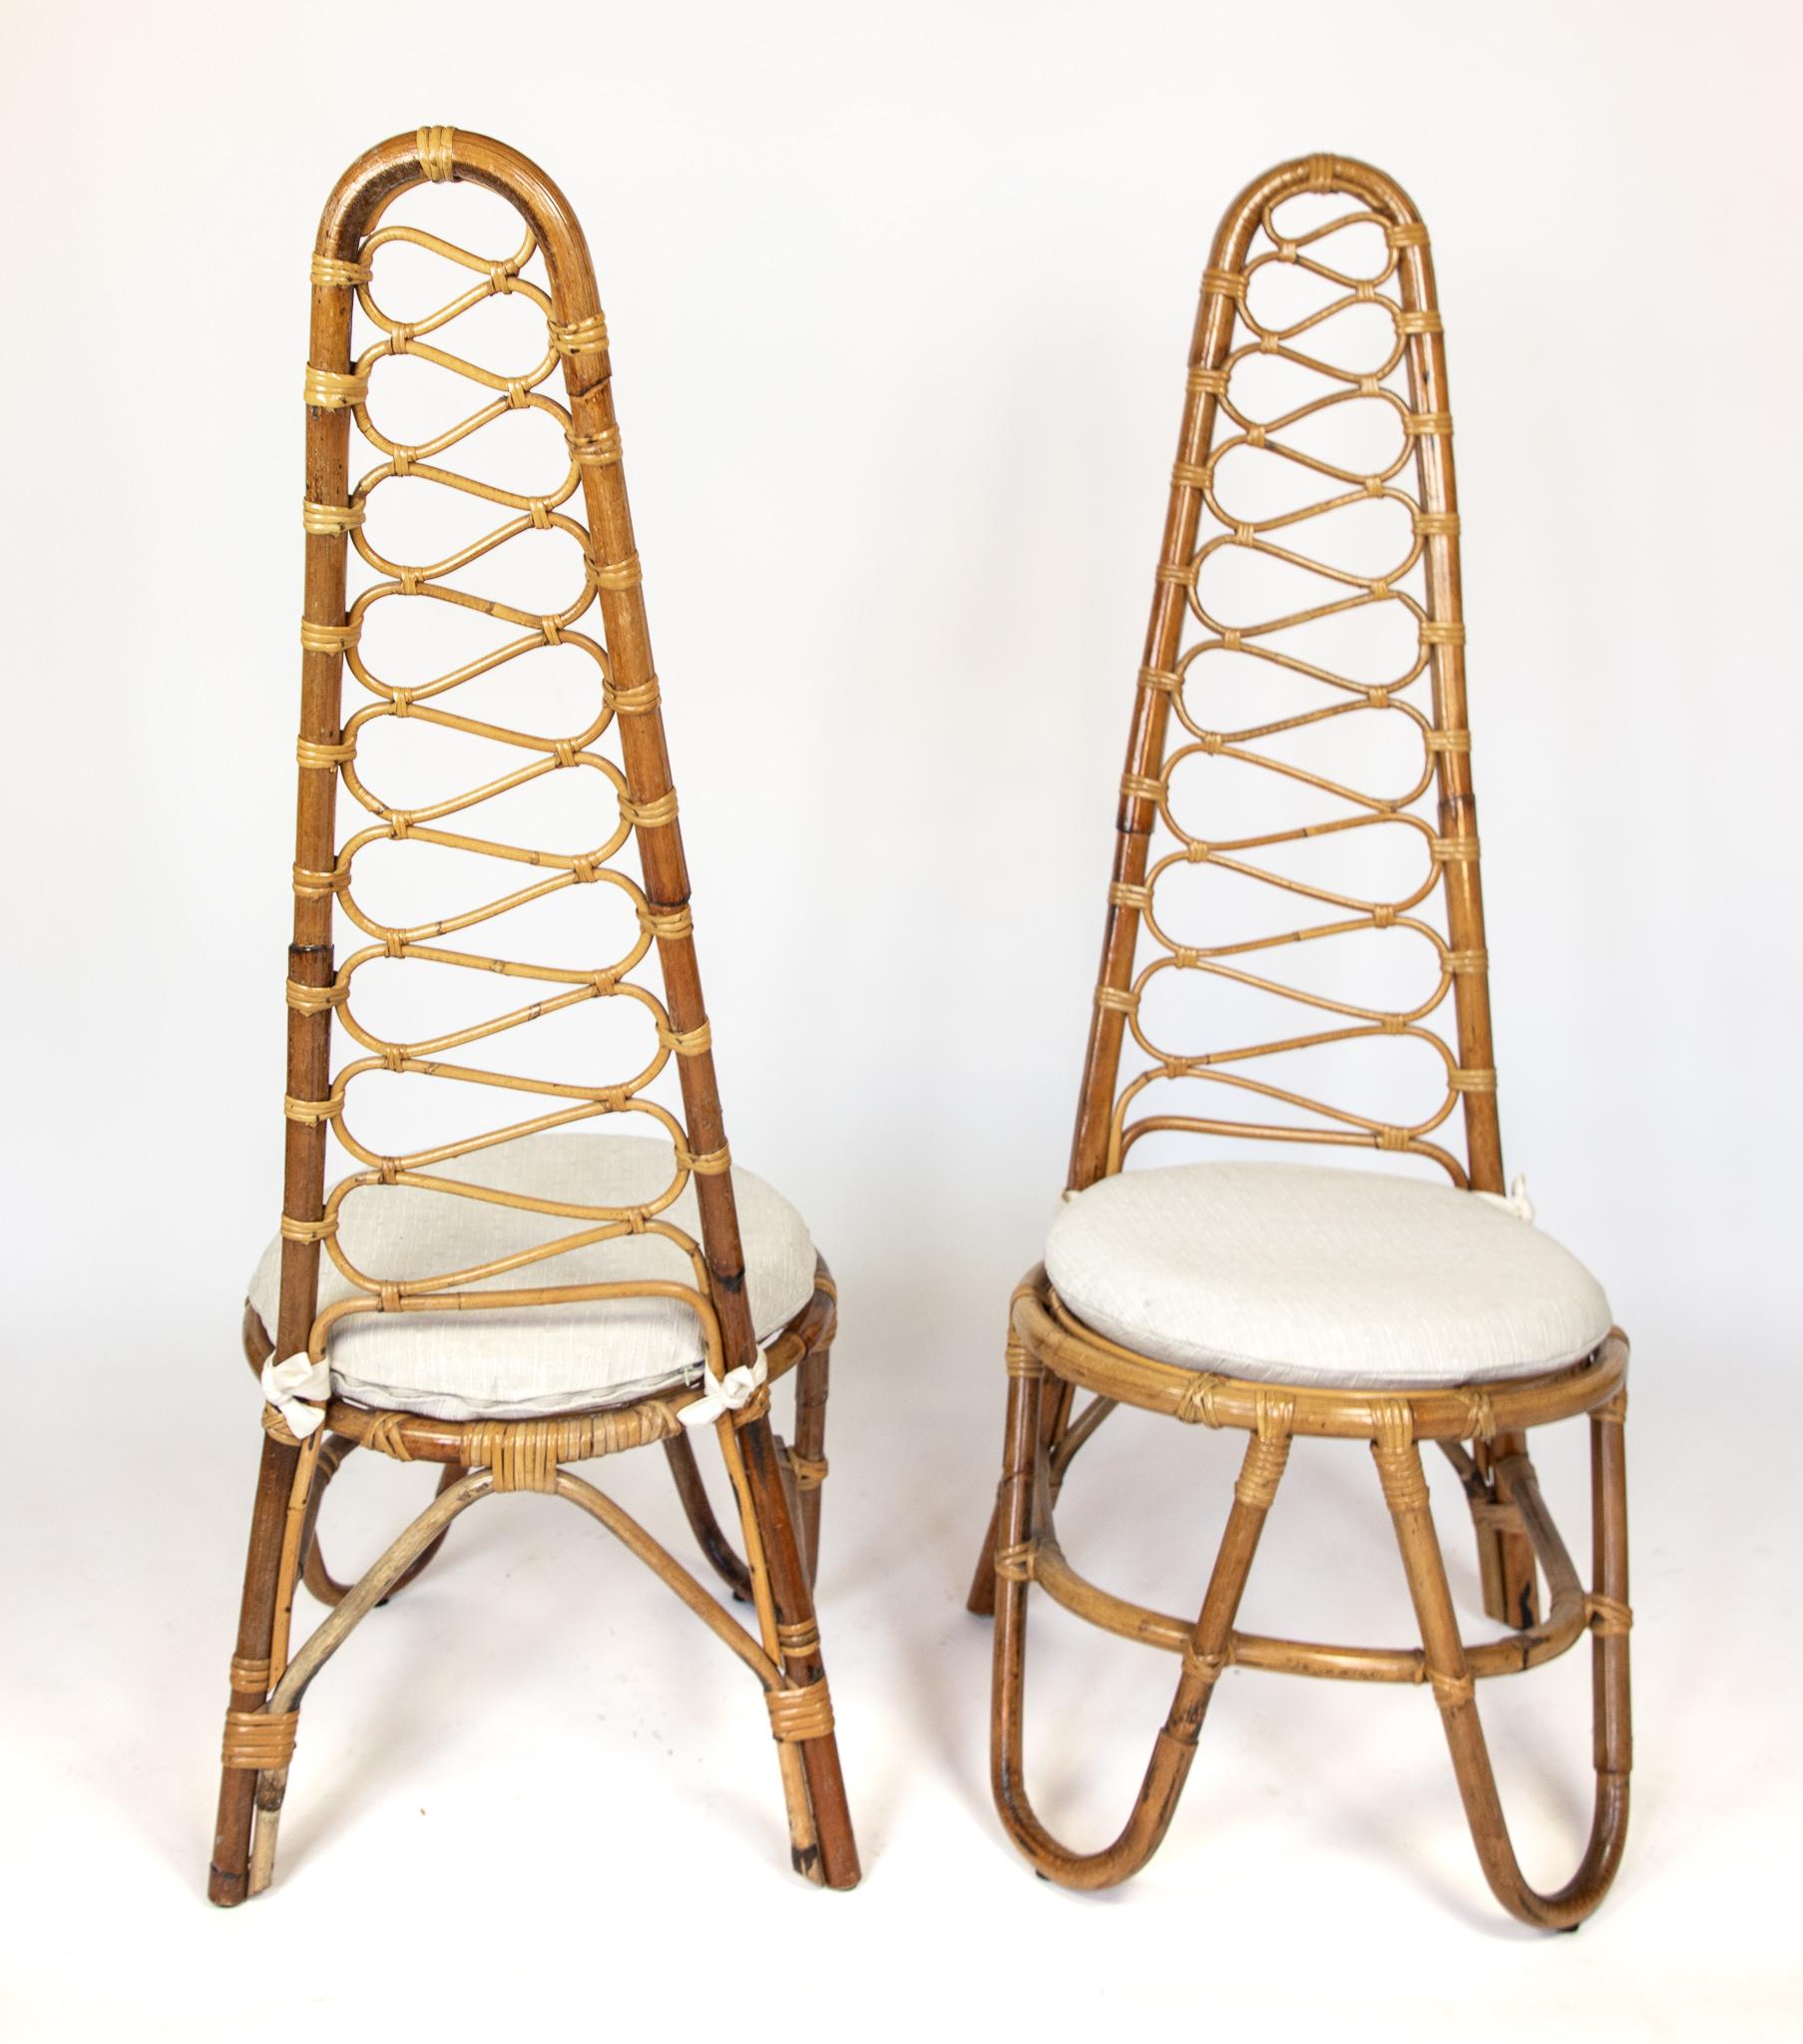 Italian Mid-Century Modern High Back Rattan Chairs and Table, Italy 1960s For Sale